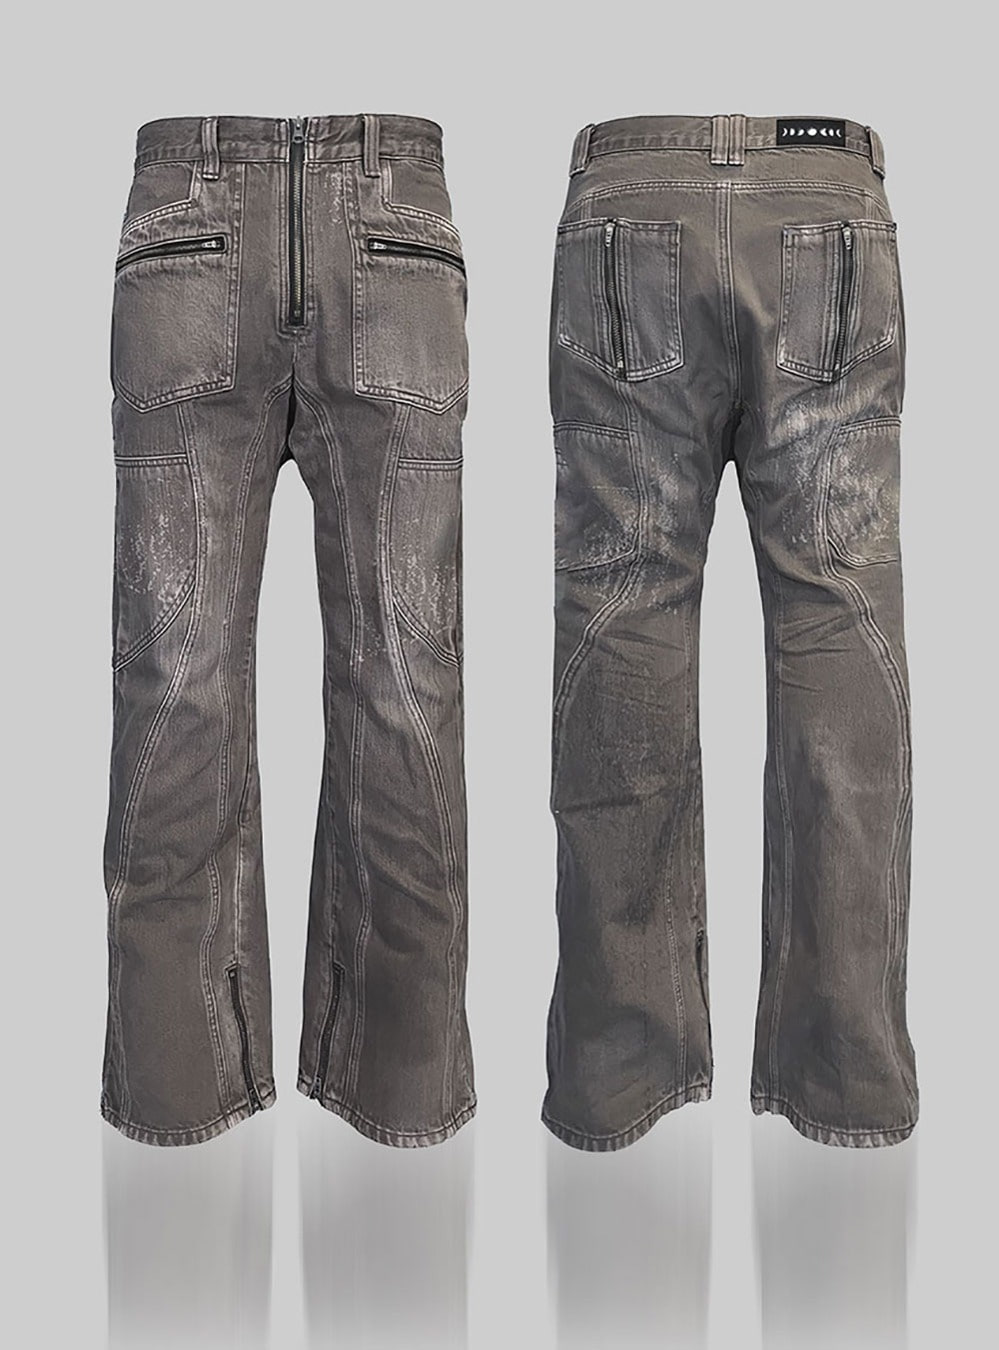 [TecNine Group] Decorated Washed-out Heavy Duty Denim Pants